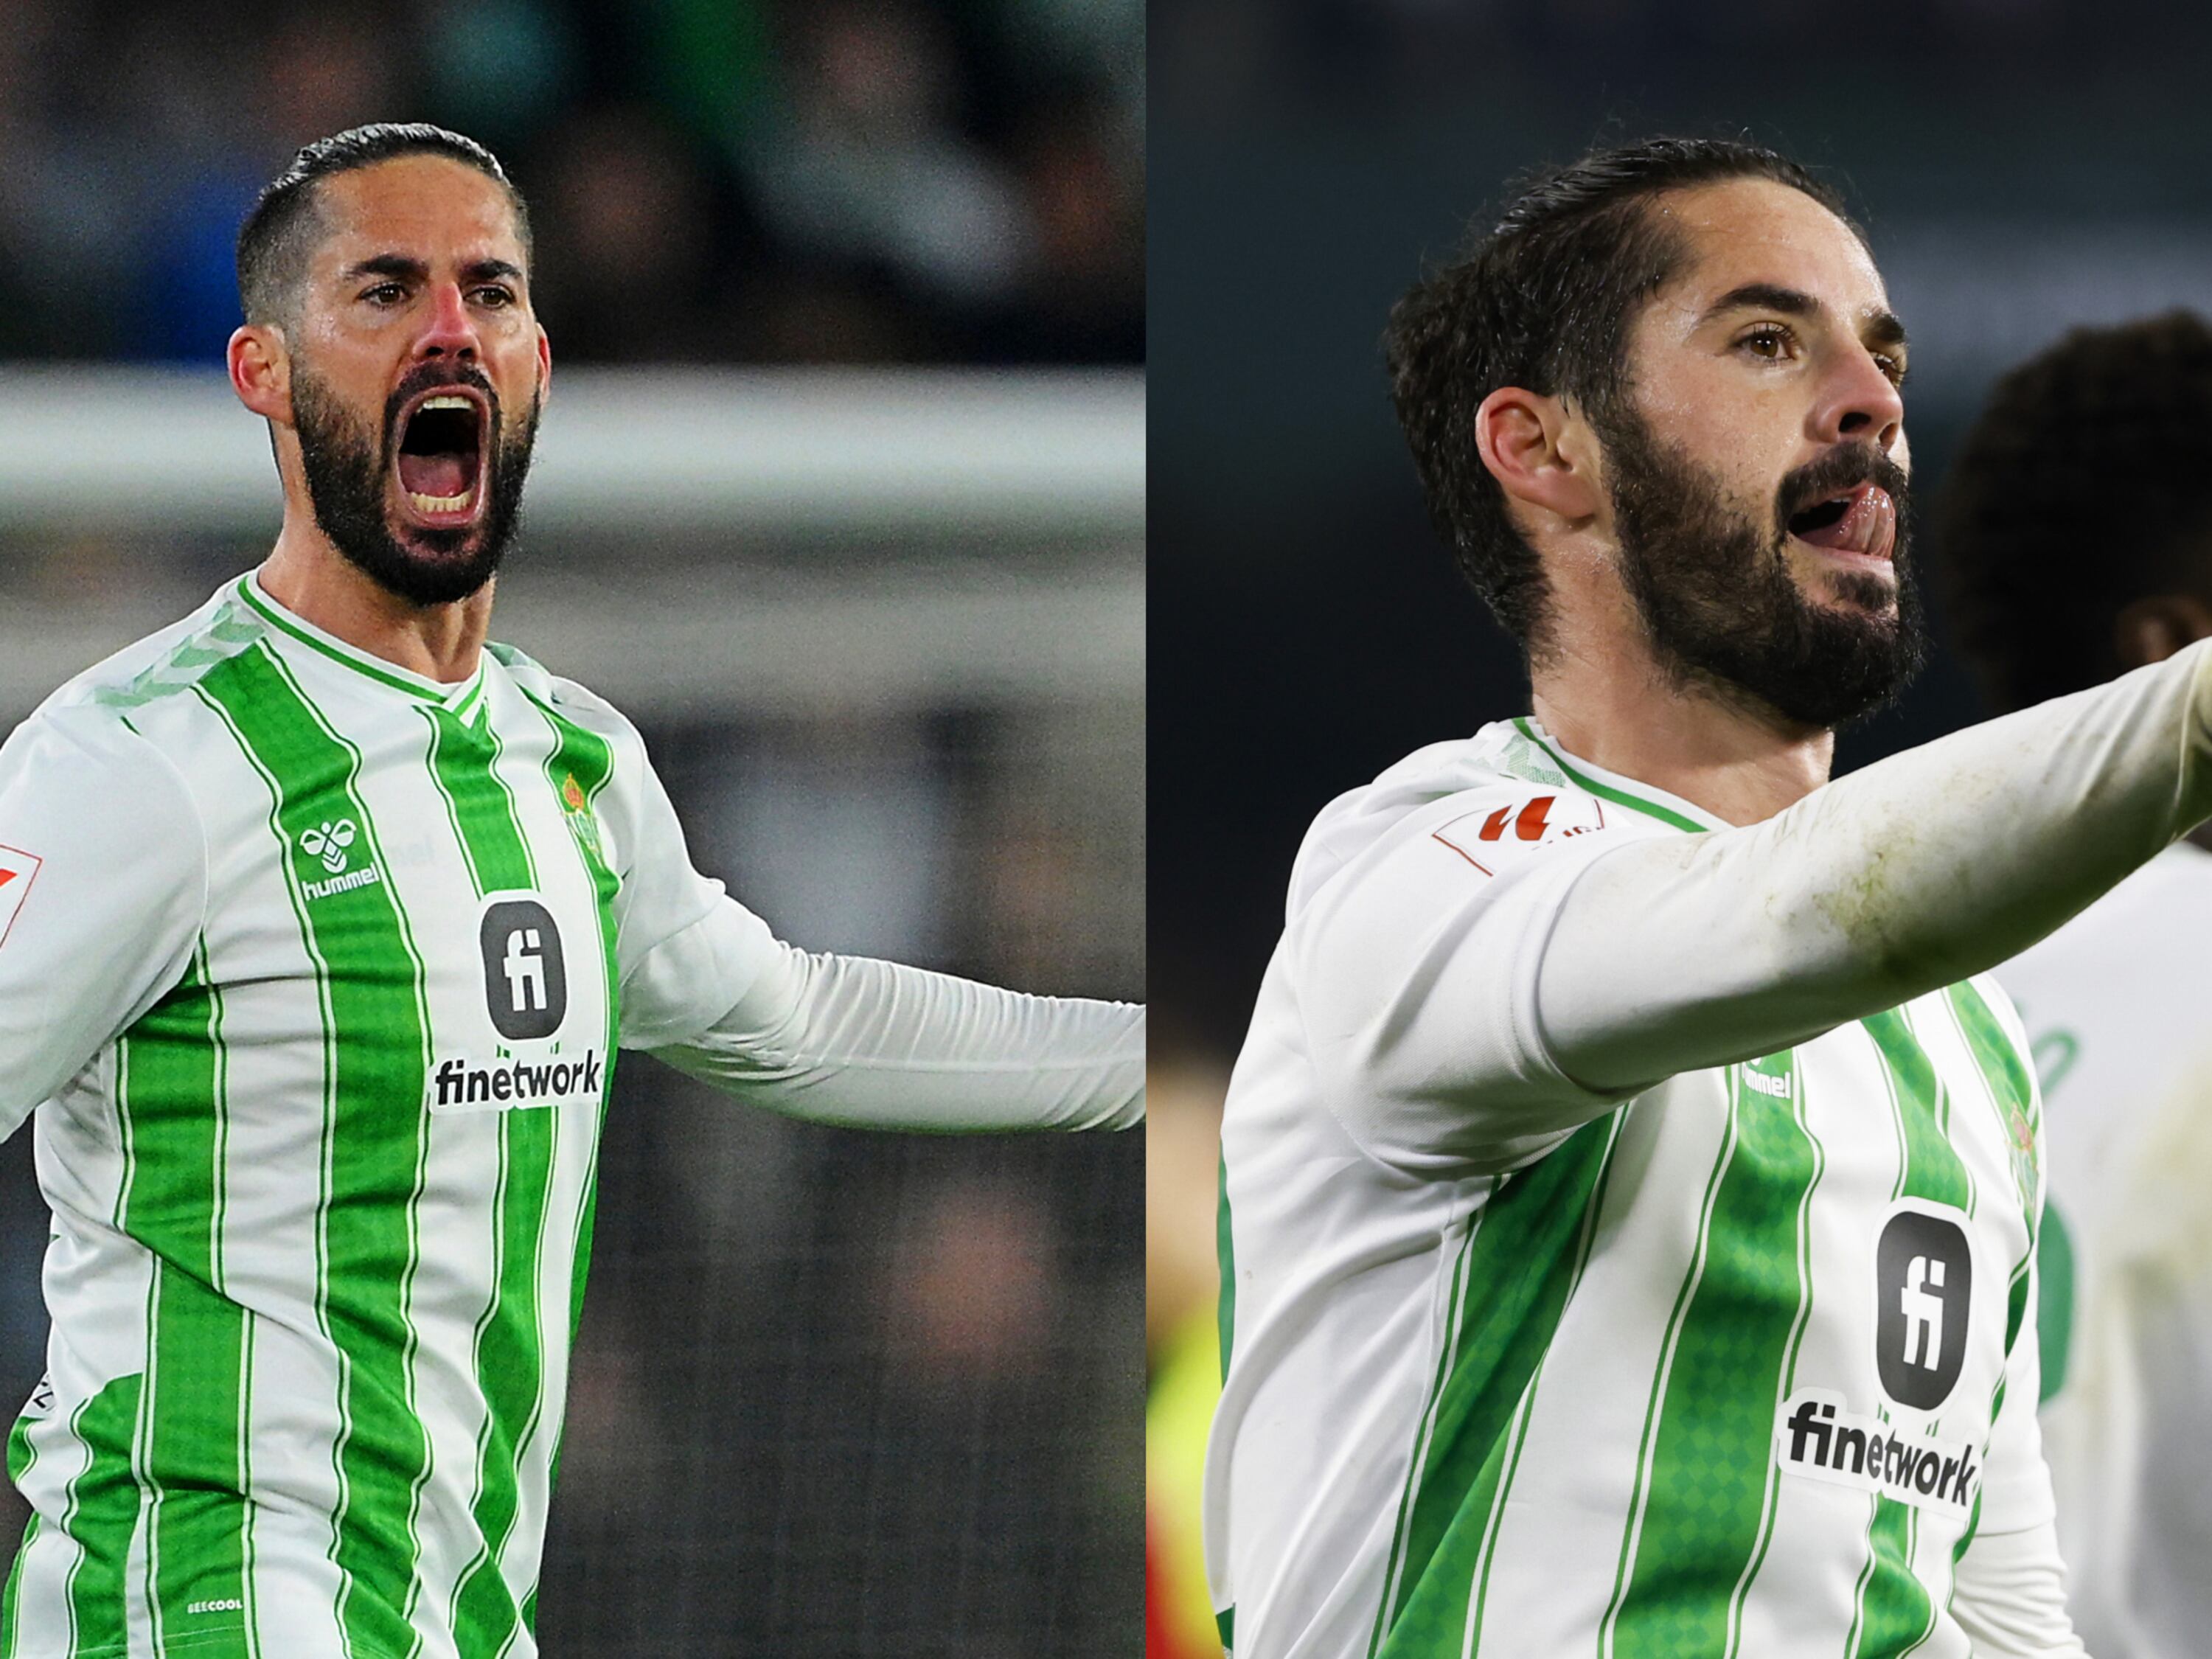 Isco Alarcón scores a magical brace! Betis tied it 2-2 against FC Barcelona